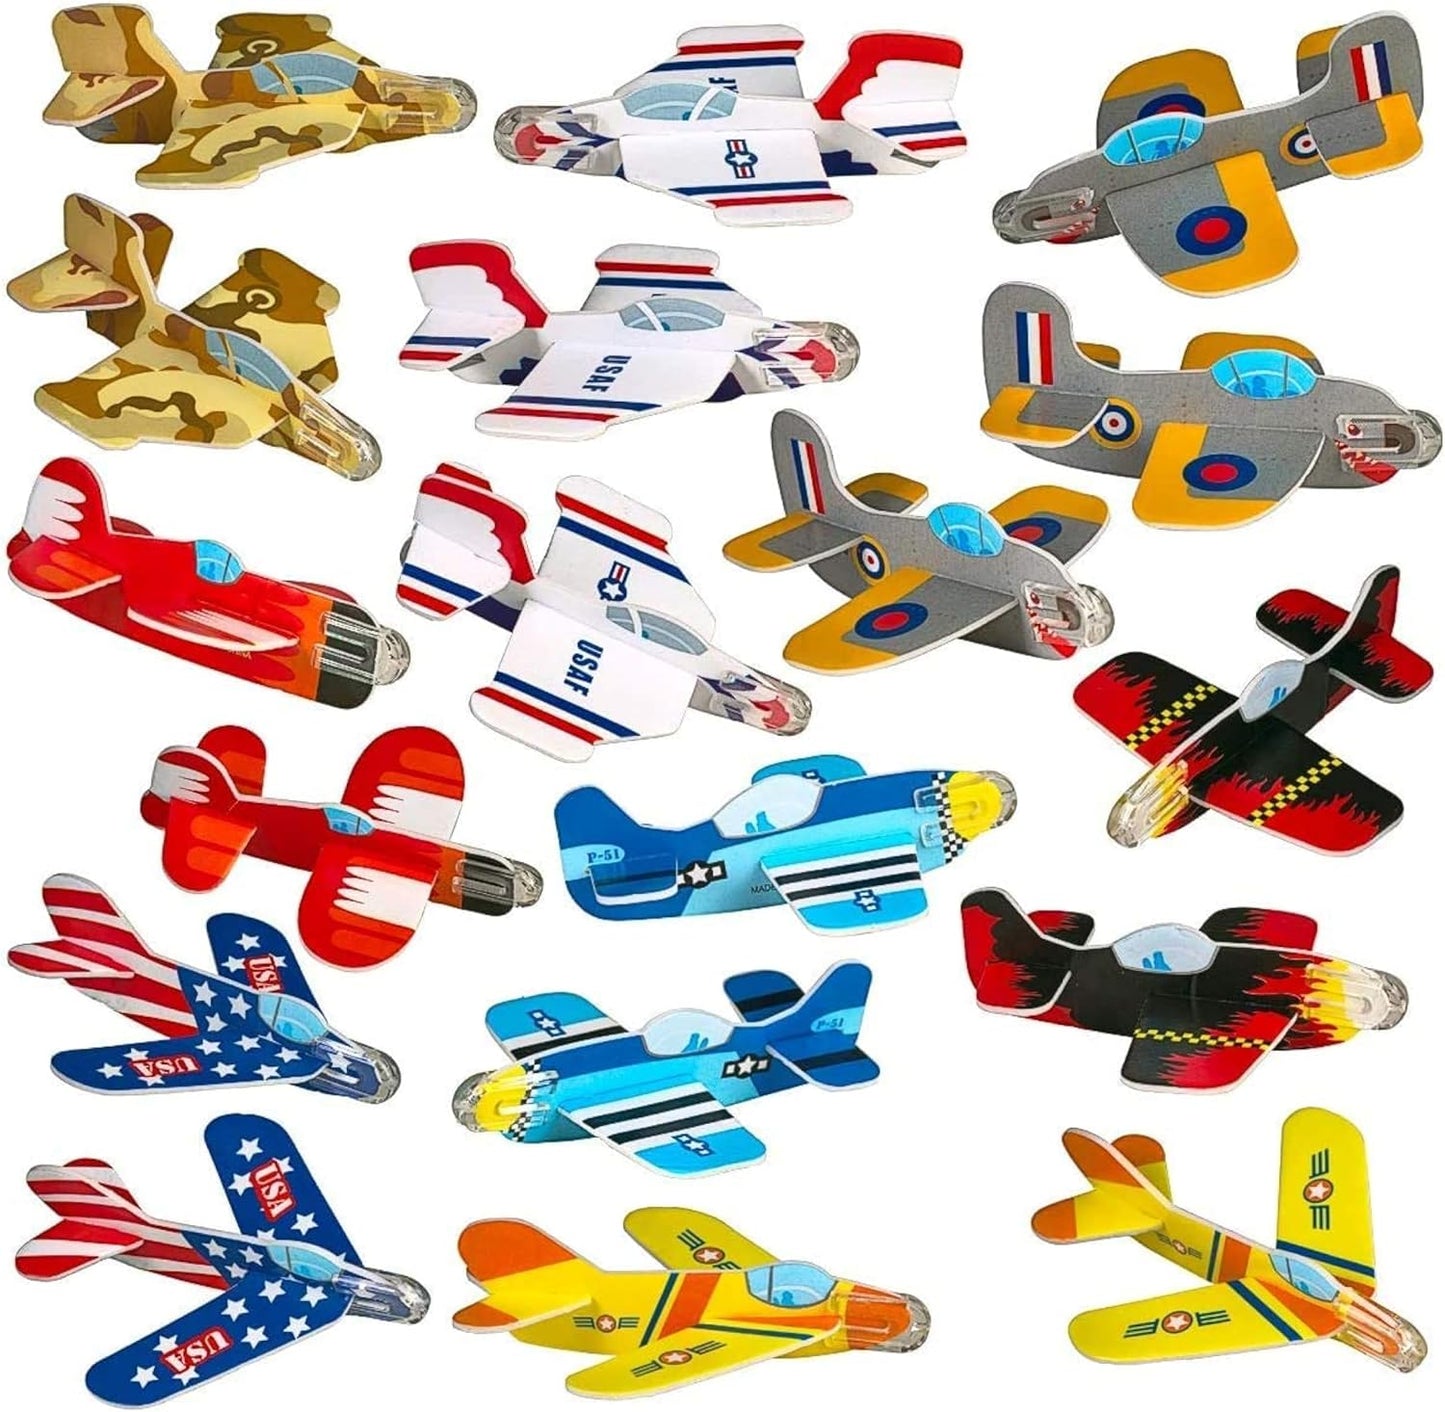 Bulk Pack of 72 Airplane Gliders Party Favors for Kids - Party Pack Individually Wrapped Flying Paper Planes – Assorted Designs - for Rewards and Prizes, Pinata Fillers, Carnival Prizes